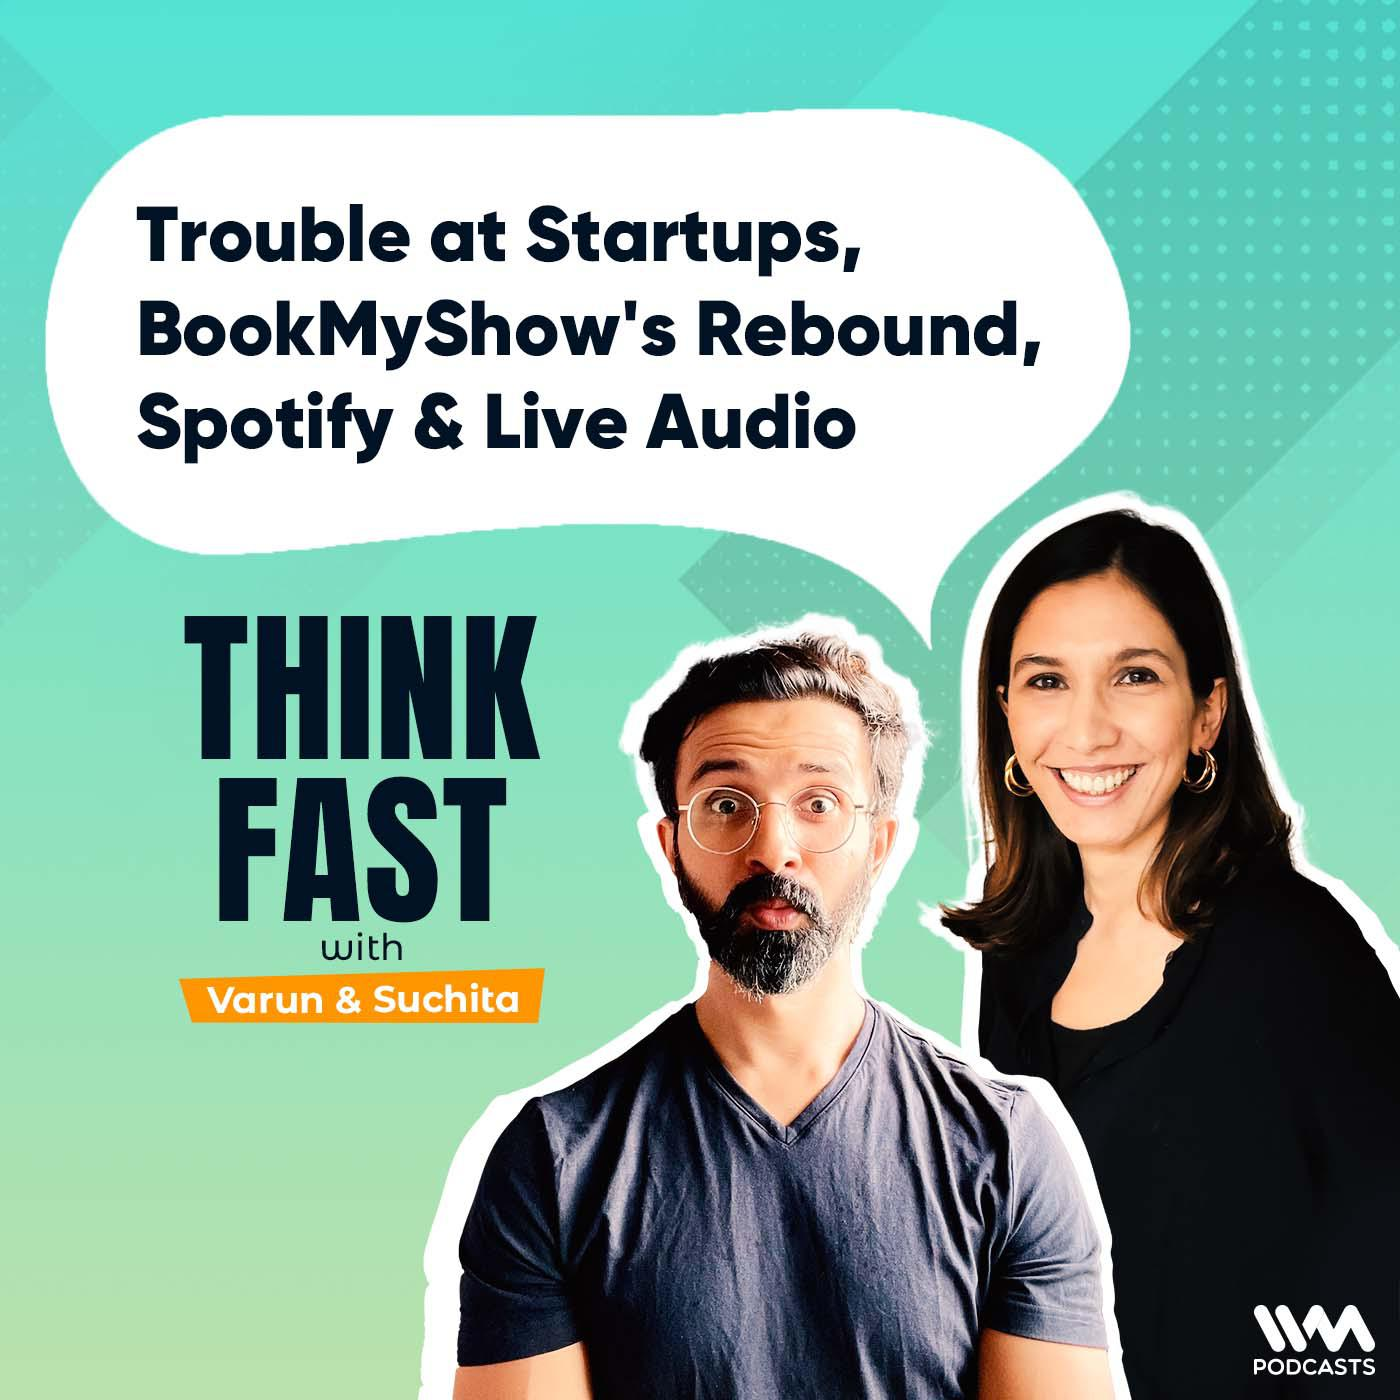 Trouble at Startups, BookMyShow’s Rebound, Spotify & Live Audio